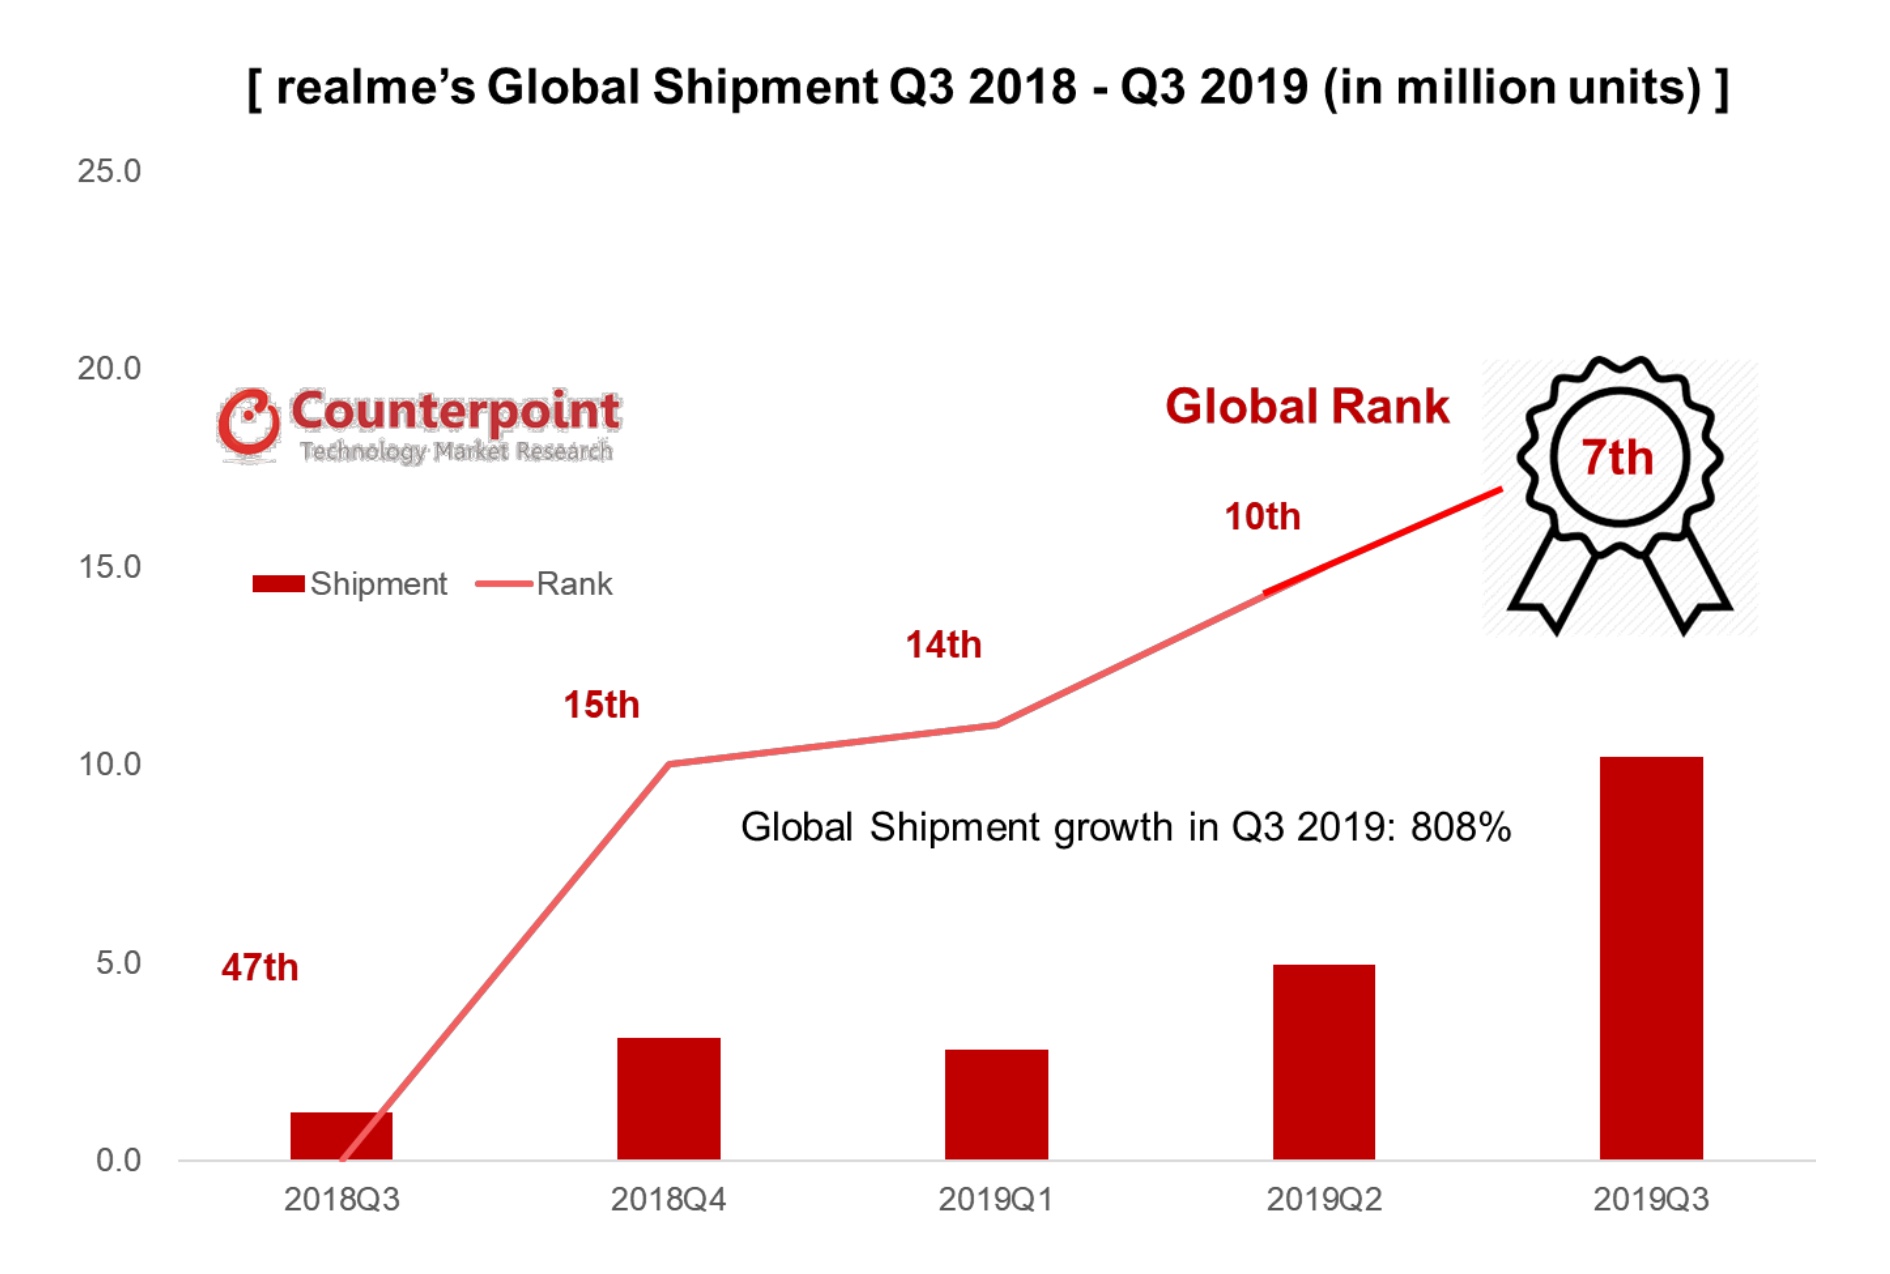 Smartphone maker Realme is taking India and other emerging markets by storm